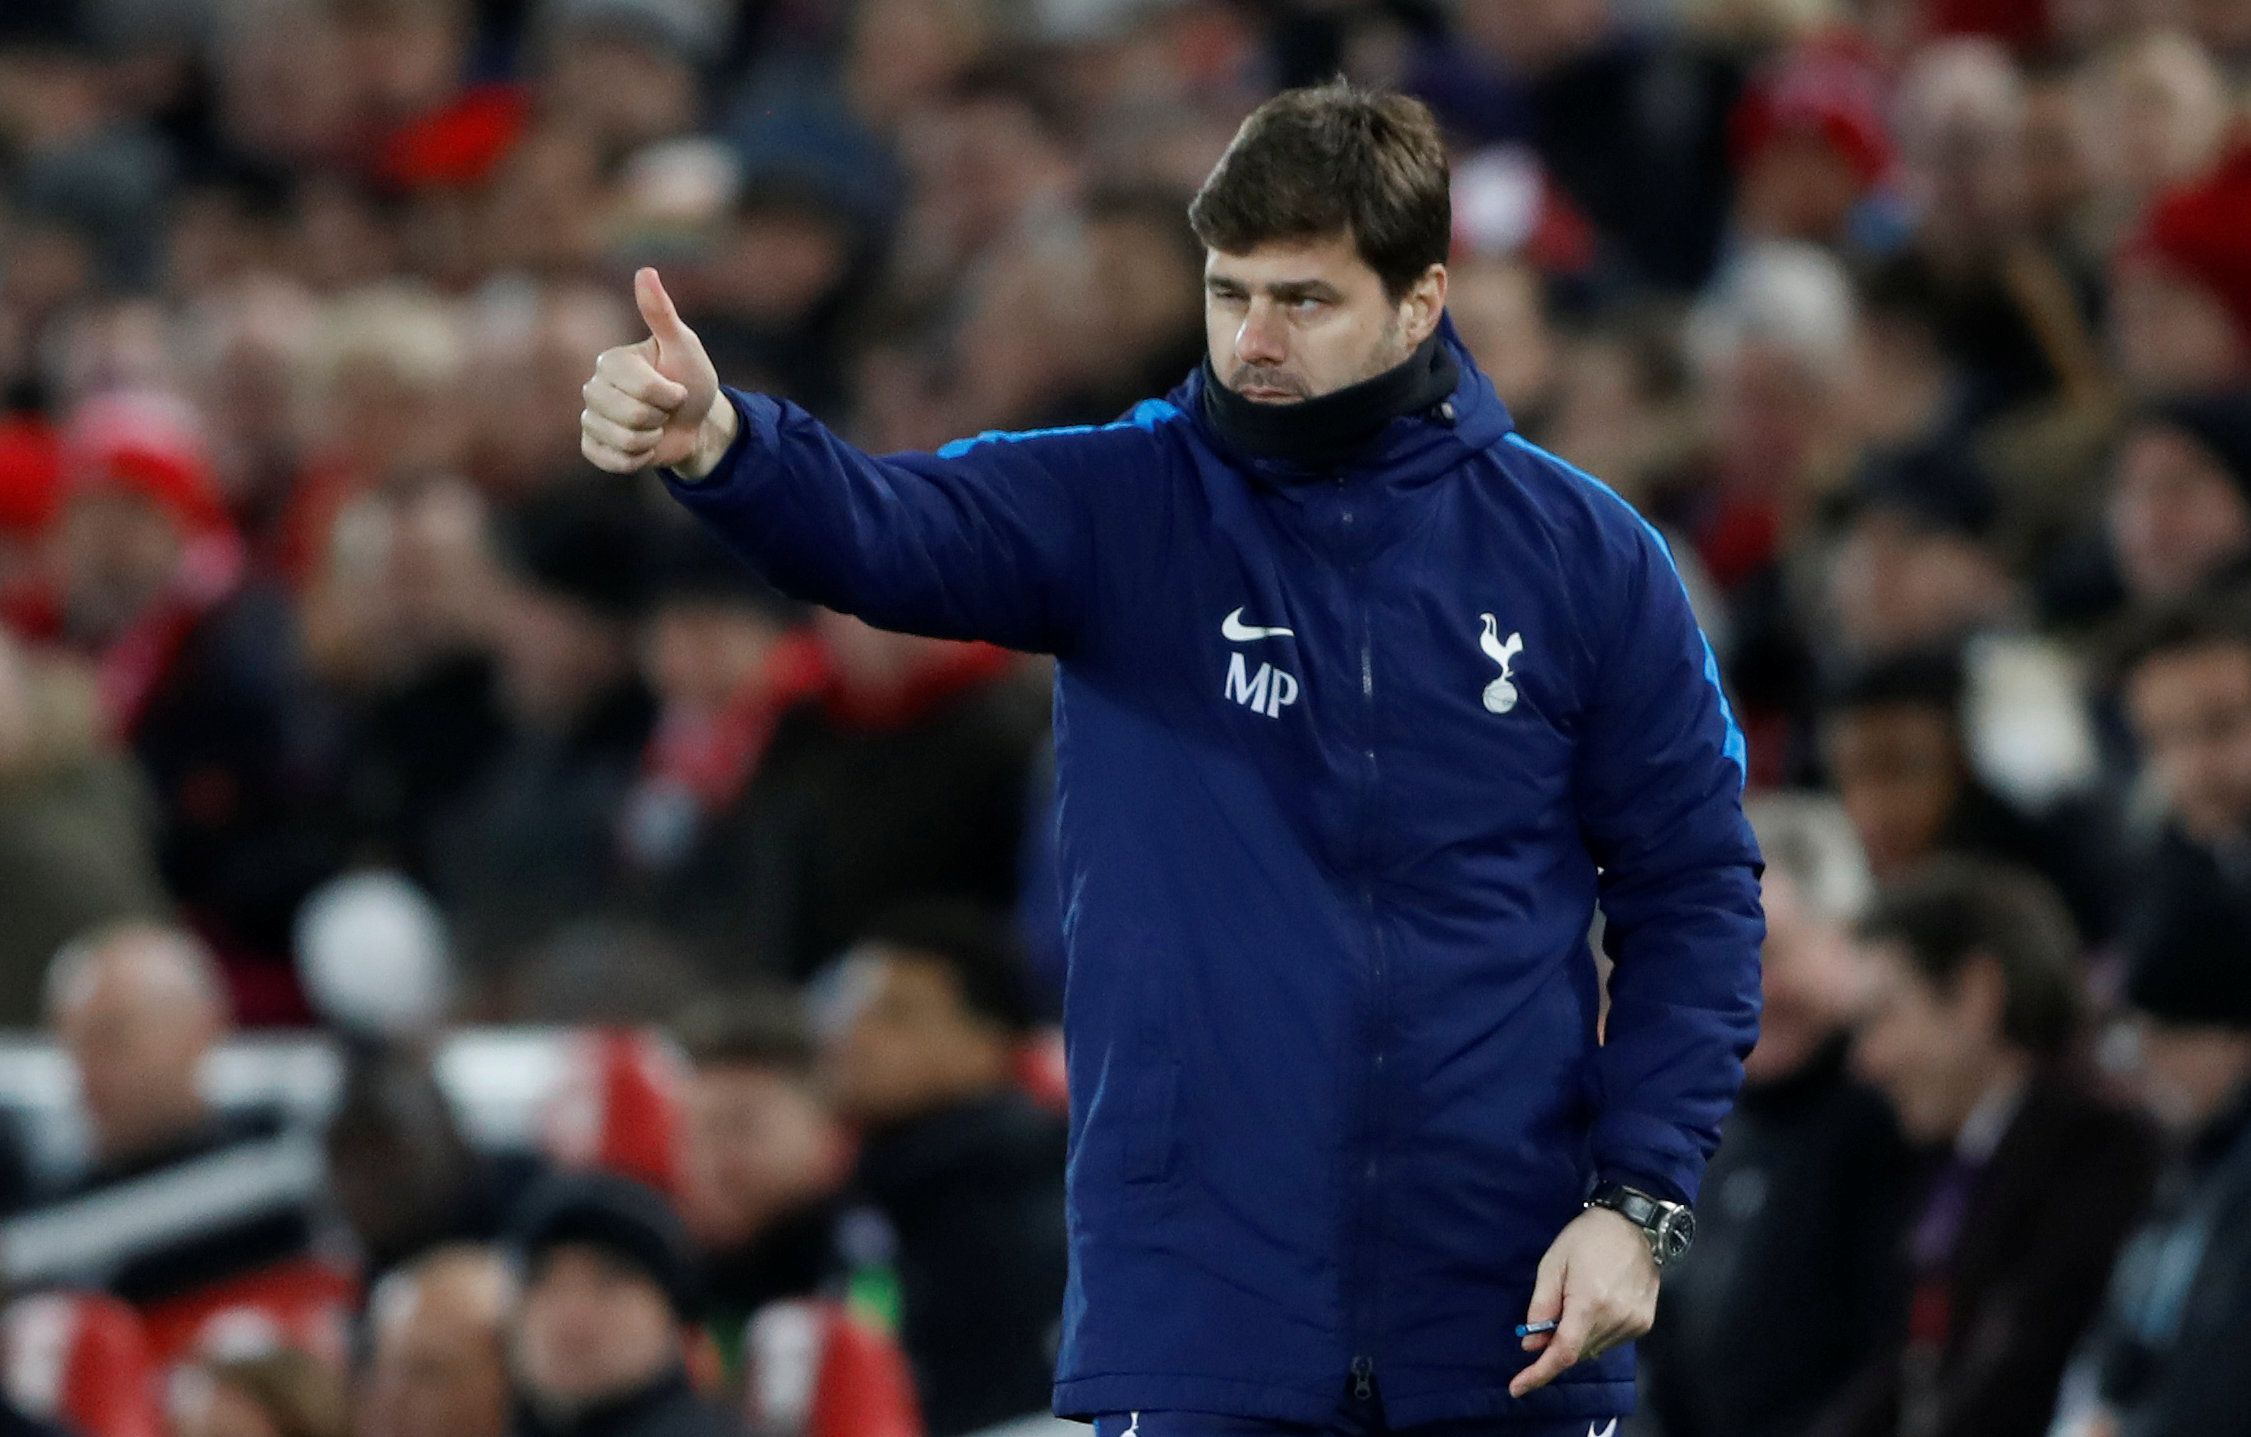 Soccer Football - Premier League - Liverpool vs Tottenham Hotspur - Anfield, Liverpool, Britain - February 4, 2018   Tottenham manager Mauricio Pochettino gestures   Action Images via Reuters/Carl Recine    EDITORIAL USE ONLY. No use with unauthorized audio, video, data, fixture lists, club/league logos or 